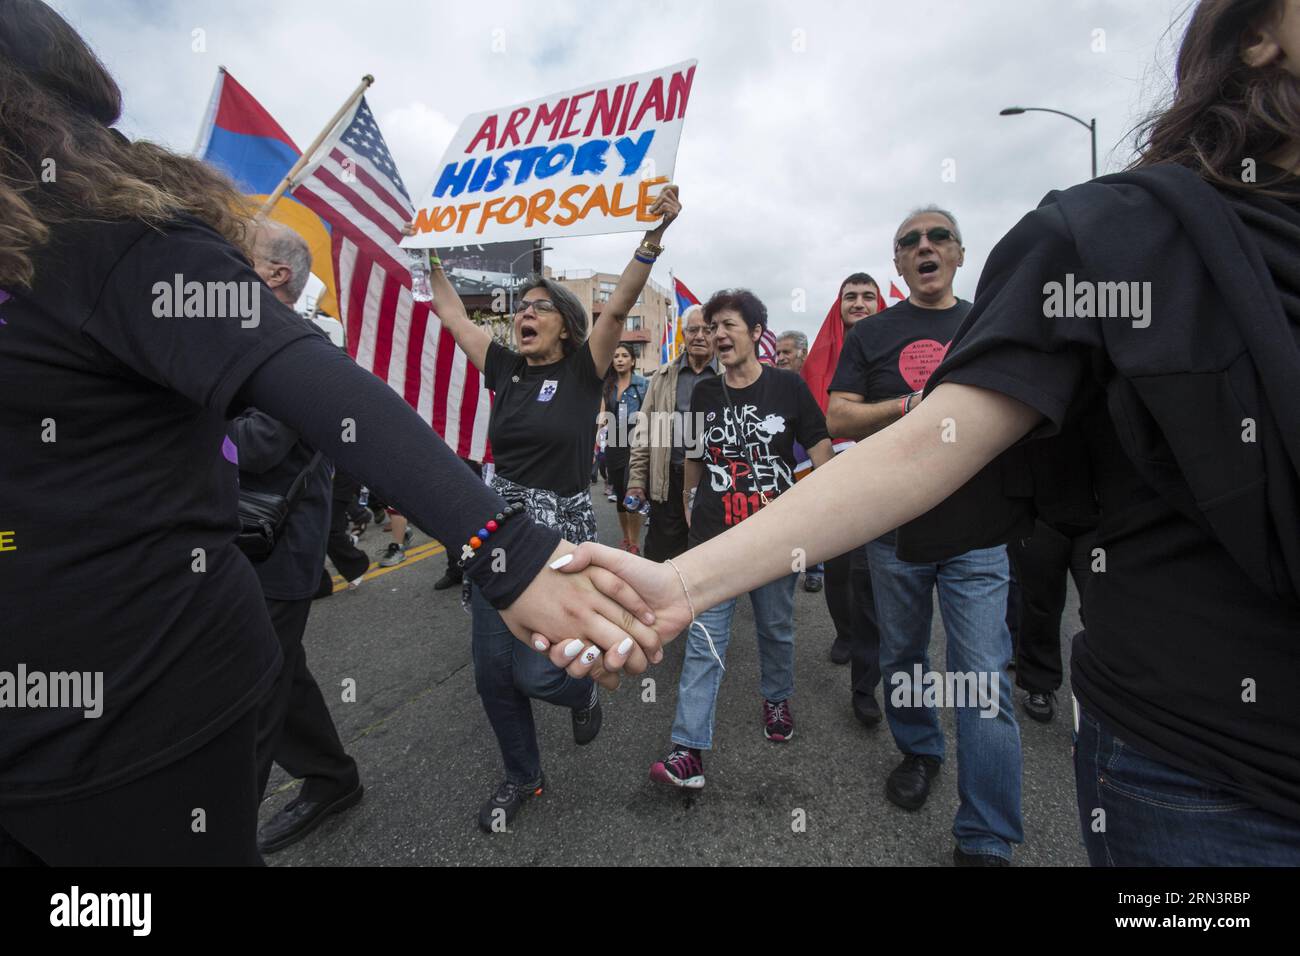 (150425) -- LOS ANGELES, Apr. 25, 2015 -- A woman holds a placard during the rally marking the 100th anniversary of a genocide against the Armenians, in Los Angeles, the United States, on April 25, 2015. Demonstrators holding placards and national flags of Armenia marched to the consulate of Turkey in Los Angeles to mark the 100th anniversary of a genocide against the Armenians. ) (zhf) US-LOS ANGELES-ARMENIA-GENOCIDE-100TH ANNIVERSARY-RALLY ZhaoxHanrong PUBLICATIONxNOTxINxCHN   Los Angeles Apr 25 2015 a Woman holds a placard during The Rally marking The 100th Anniversary of a Genocide against Stock Photo